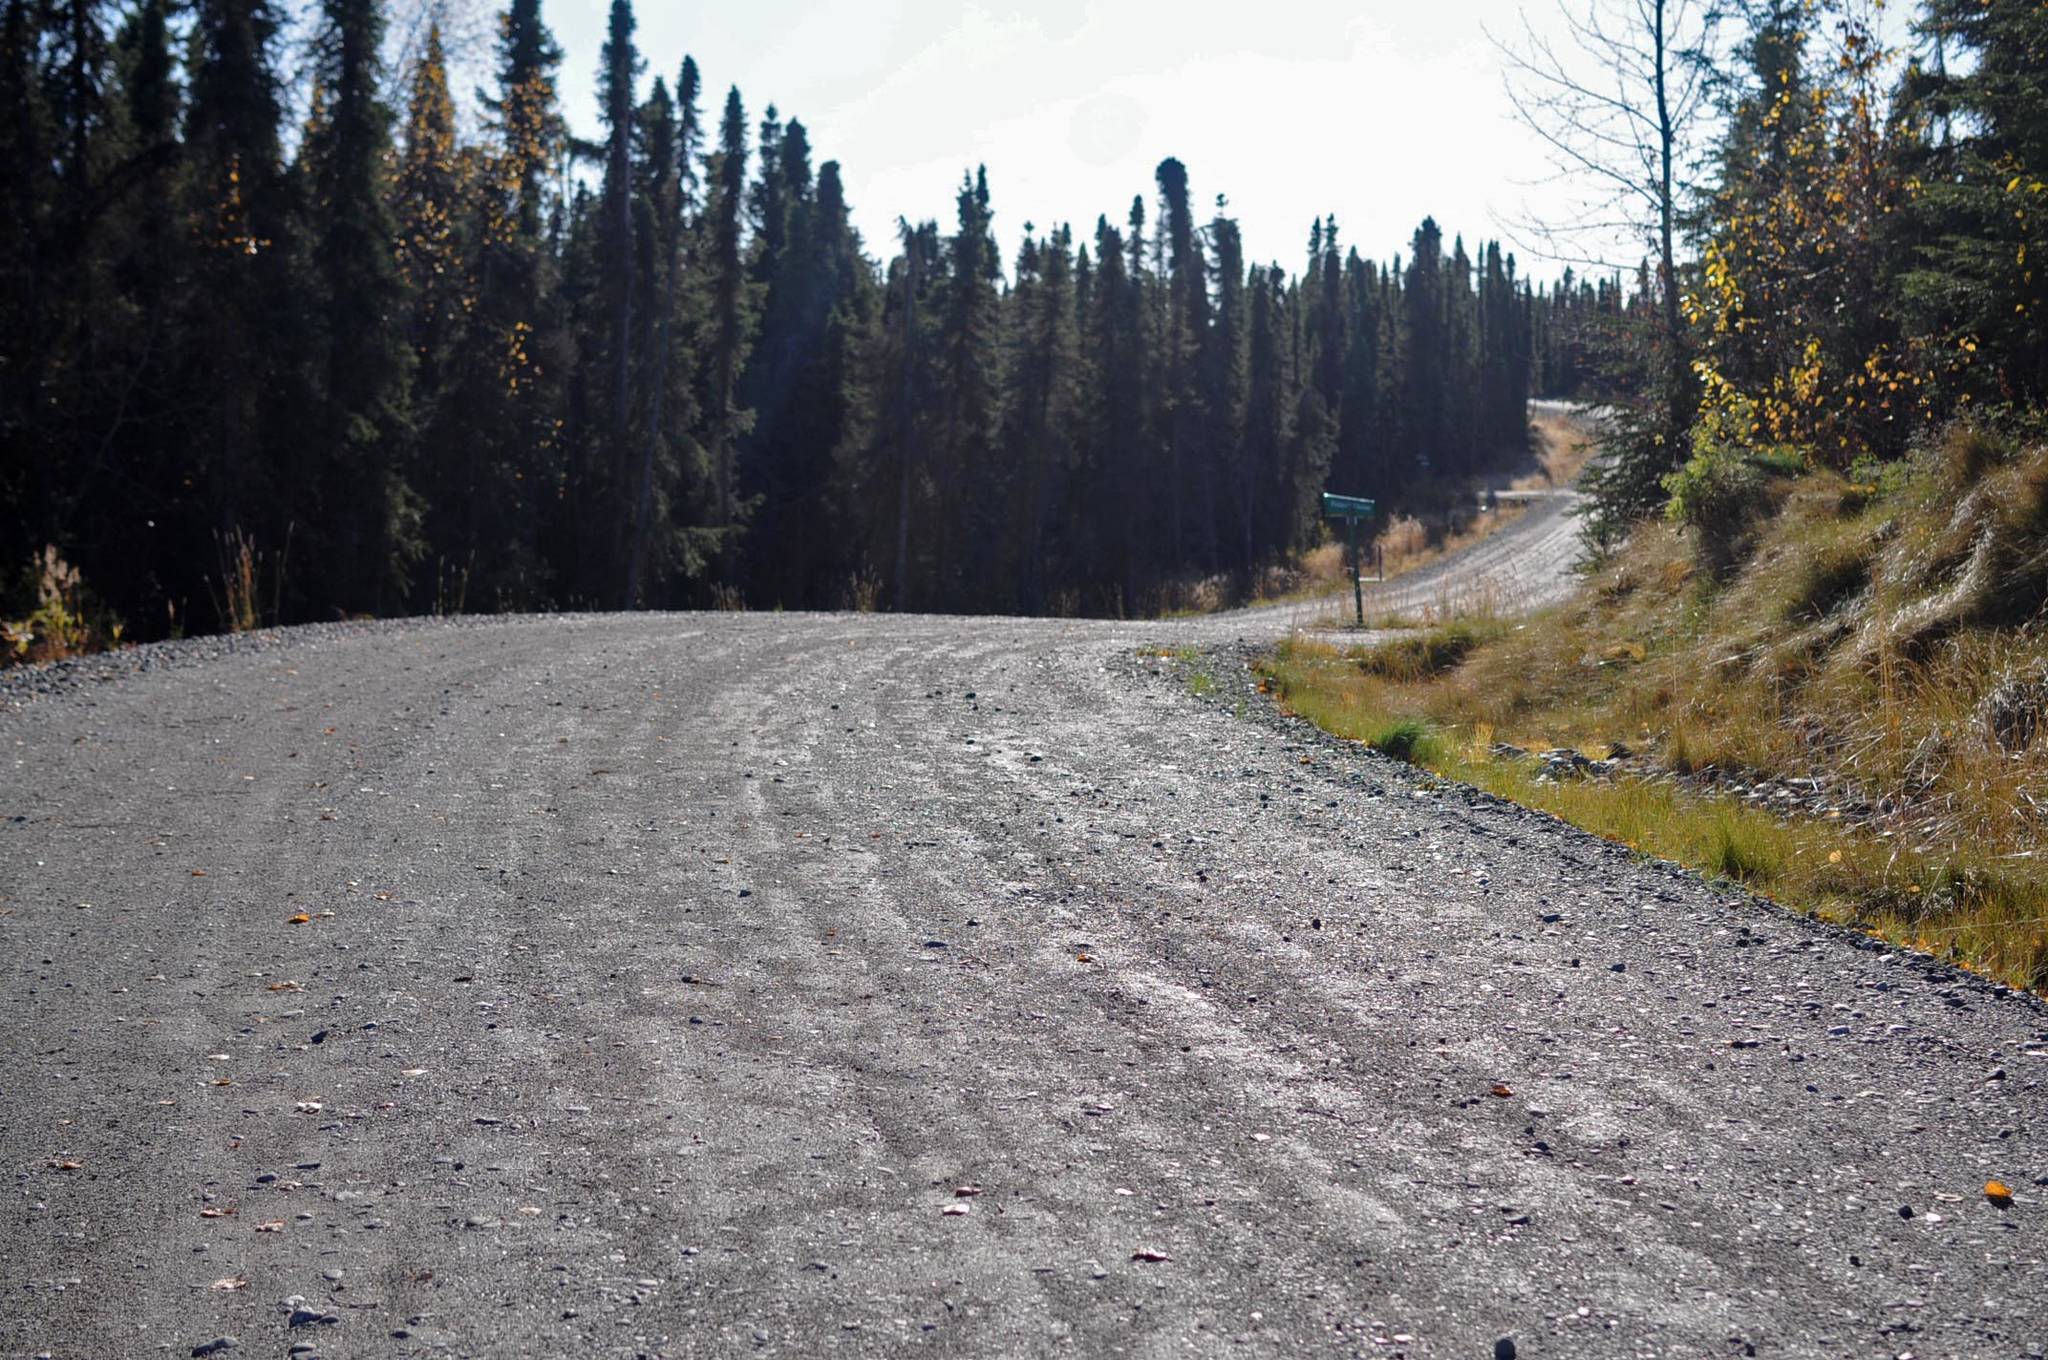 This September 2017 photo shows Hook Lane, a Kenai Peninsula Borough-maintained gravel road off Arc Loop Road just south of Soldotna, Alaska. The Kenai Peninsula Borough’s Material Site Working Group is currently debating possible revisions to the code governing gravel pits on the peninsula. (Photo by Elizabeth Earl/Peninsula Clarion, file)